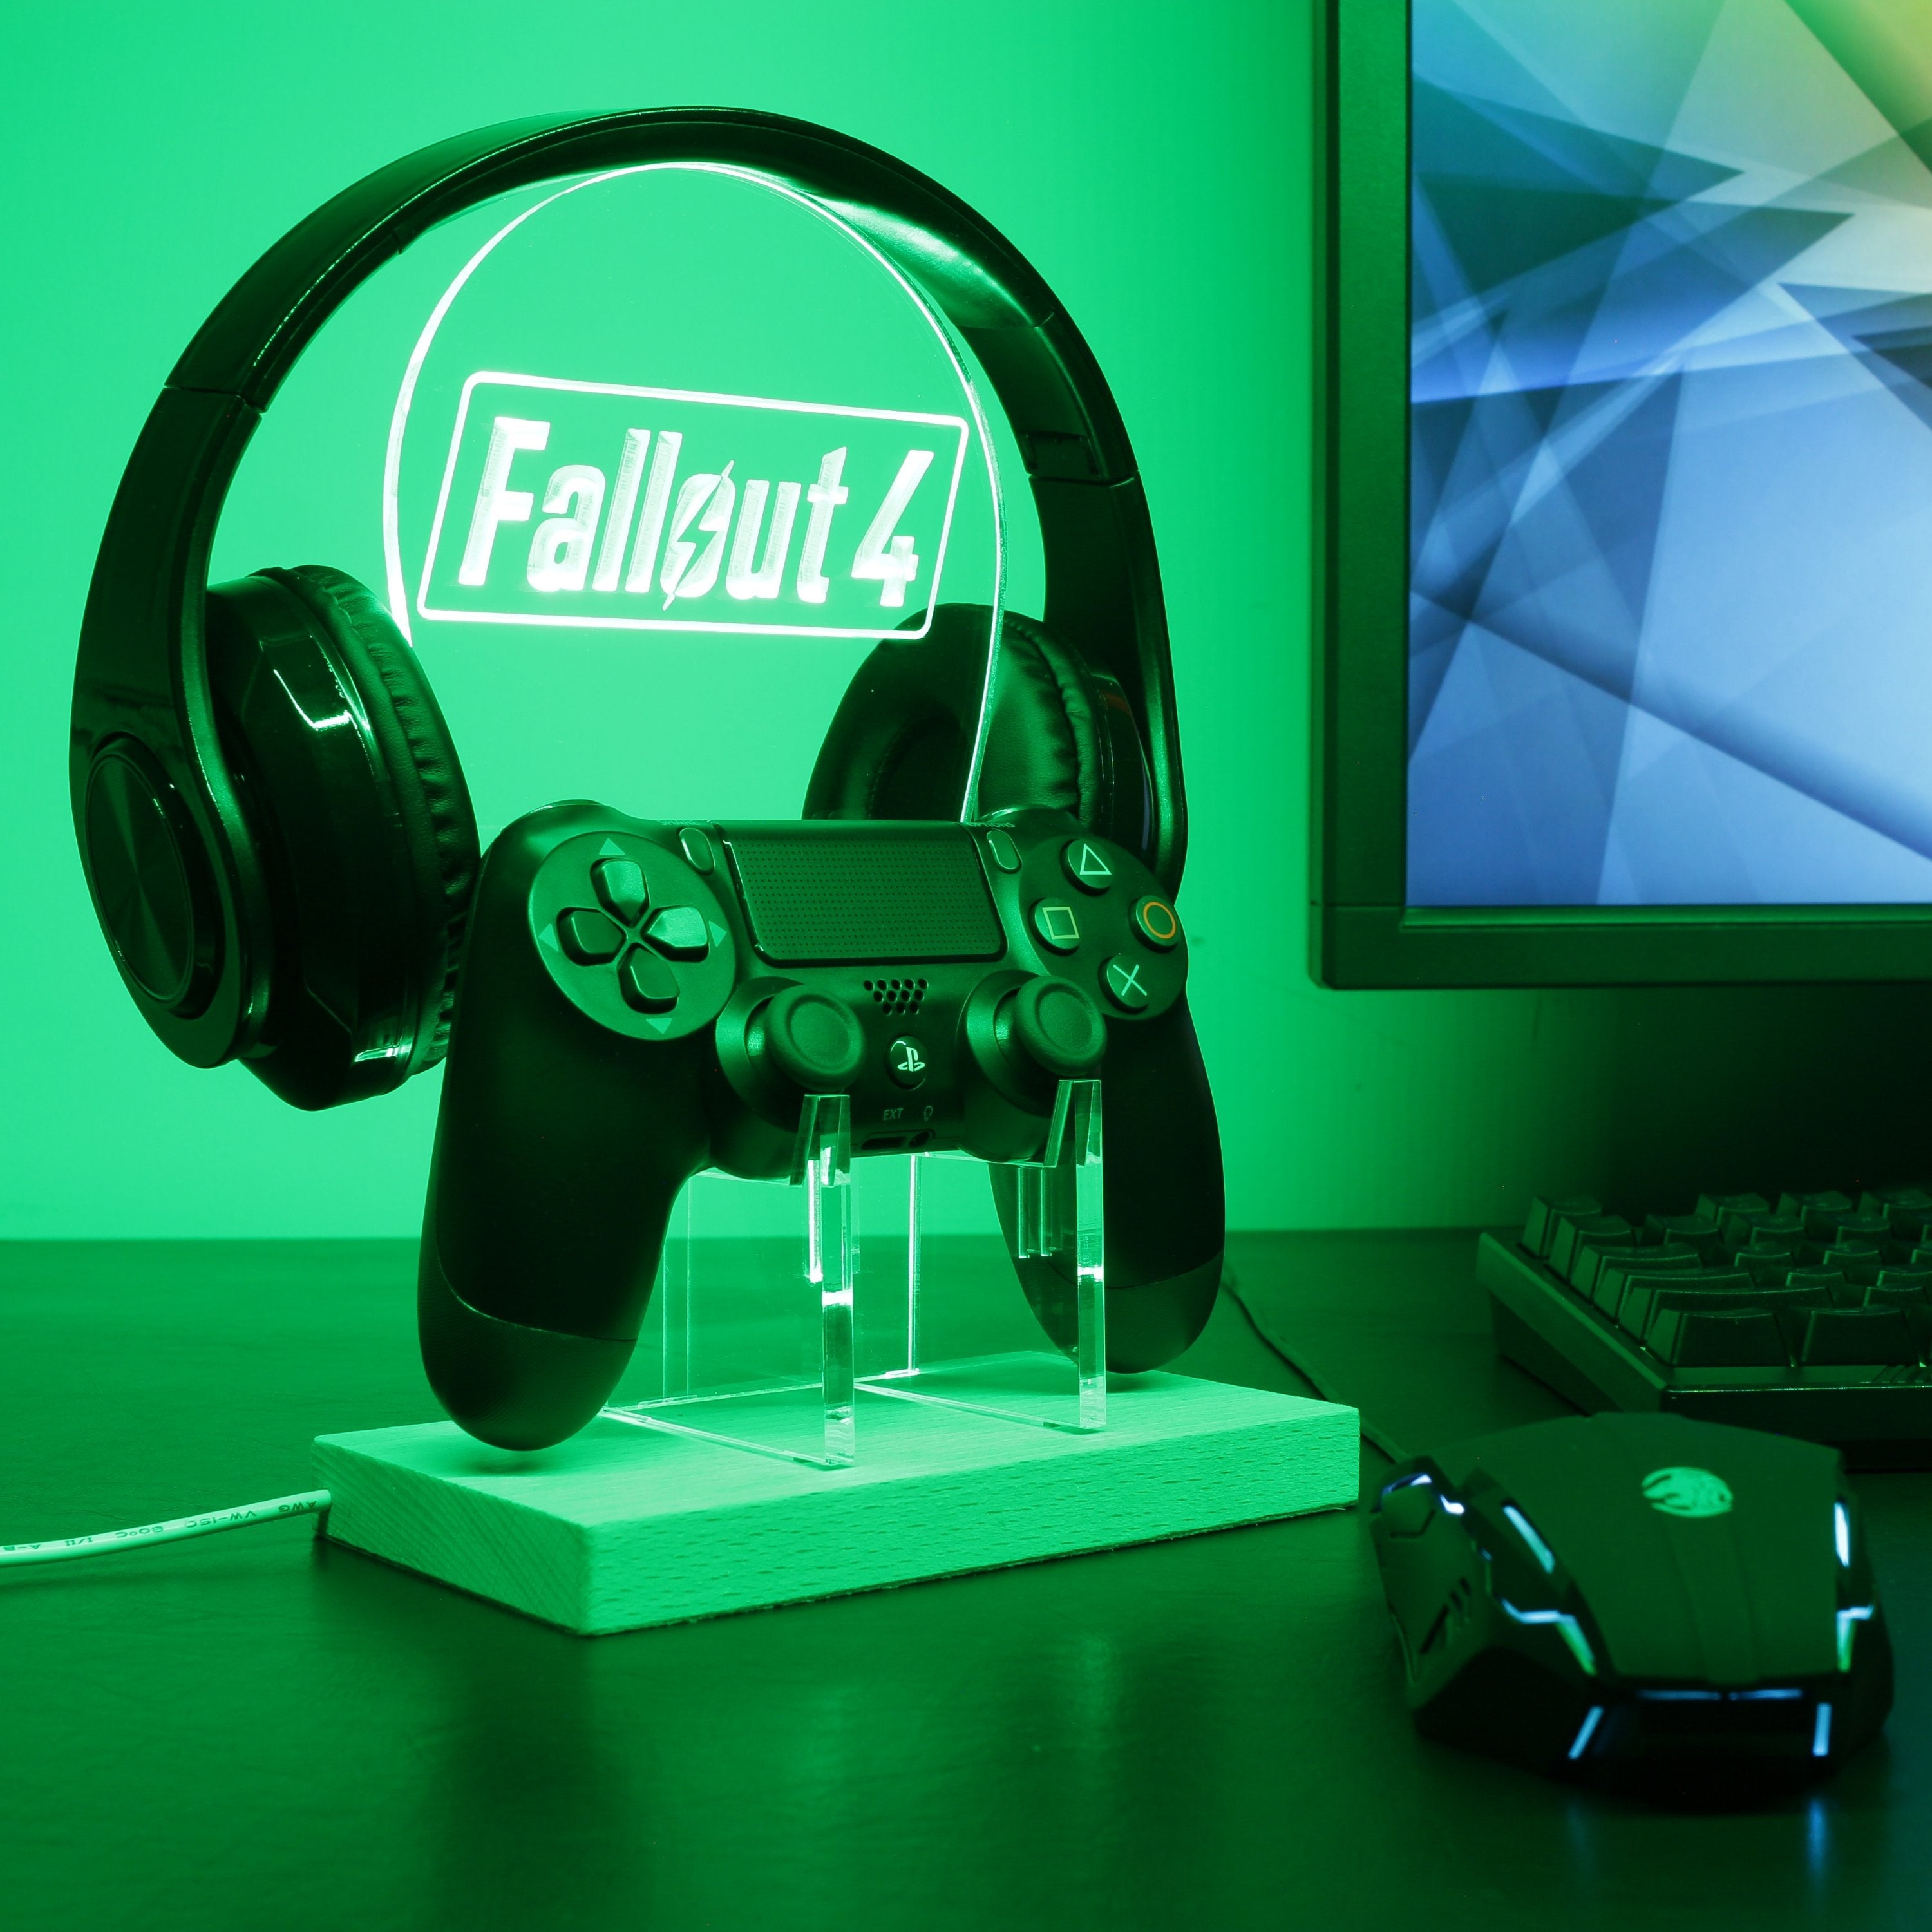 Fallout 4 LED Gaming Headset Controller Stand